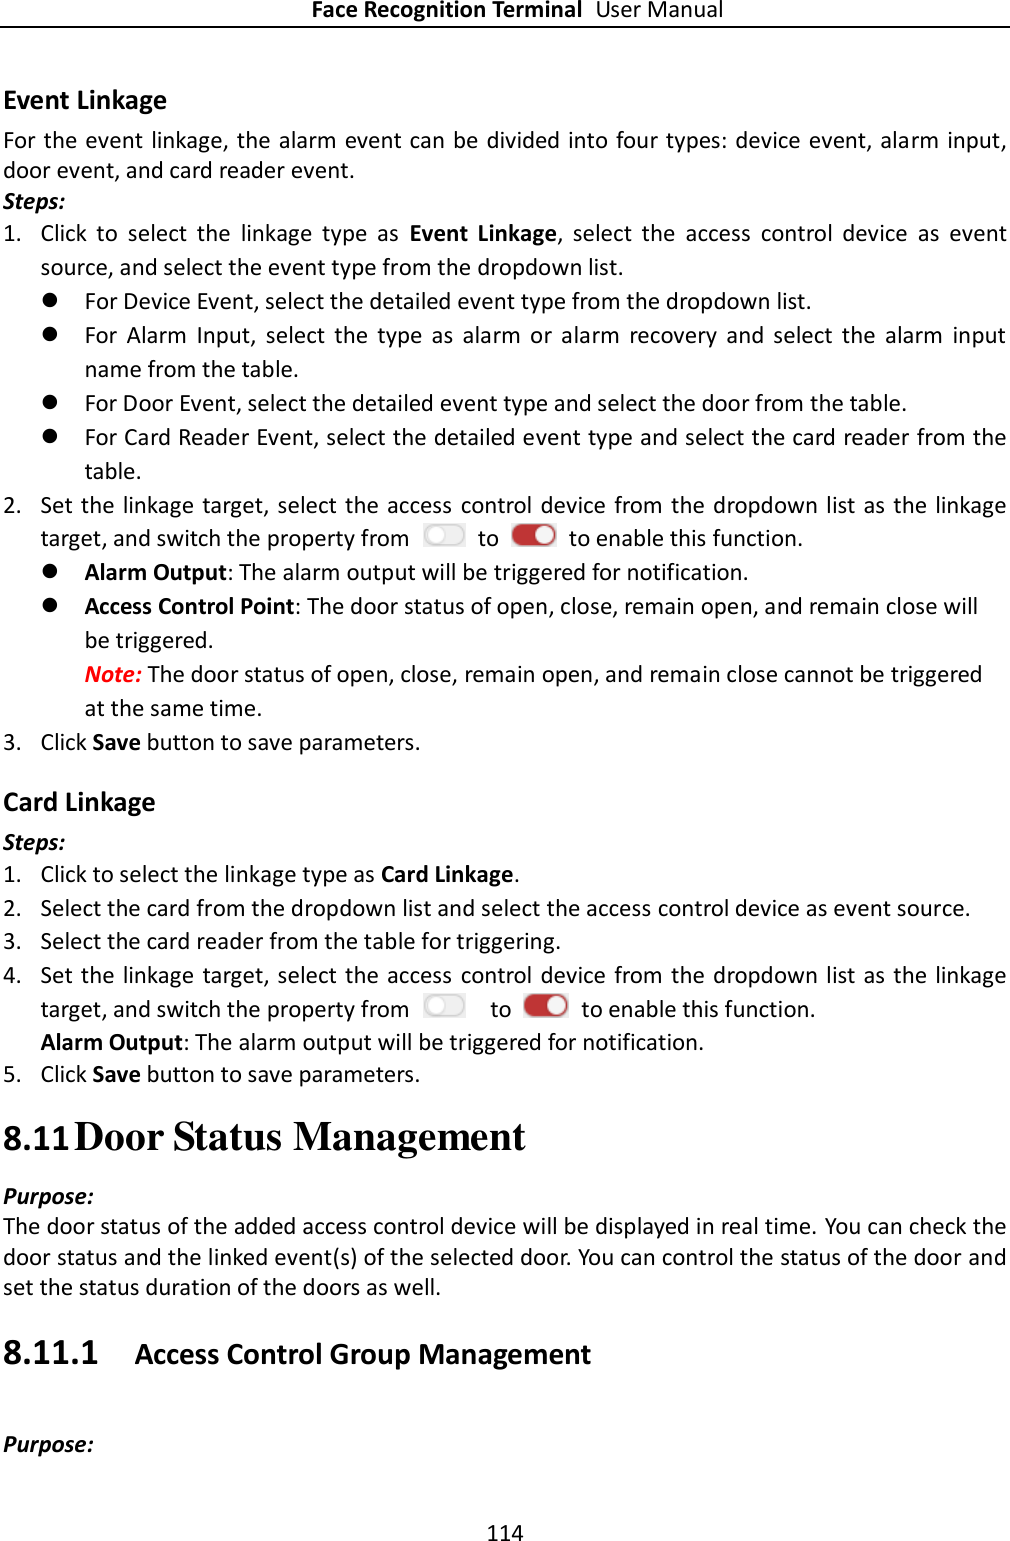 Face Recognition Terminal User Manual 114  Event Linkage For the event linkage, the alarm event can be divided into four types: device event, alarm input, door event, and card reader event.   Steps: 1. Click  to  select  the  linkage  type  as  Event  Linkage,  select  the  access  control  device  as  event source, and select the event type from the dropdown list.  For Device Event, select the detailed event type from the dropdown list.  For  Alarm  Input,  select  the  type  as  alarm  or  alarm  recovery  and  select  the  alarm  input name from the table.  For Door Event, select the detailed event type and select the door from the table.  For Card Reader Event, select the detailed event type and select the card reader from the table. 2. Set the linkage target, select the access  control device from the dropdown list as the linkage target, and switch the property from    to    to enable this function.  Alarm Output: The alarm output will be triggered for notification.  Access Control Point: The door status of open, close, remain open, and remain close will be triggered. Note: The door status of open, close, remain open, and remain close cannot be triggered at the same time.   3. Click Save button to save parameters.     Card Linkage Steps: 1. Click to select the linkage type as Card Linkage. 2. Select the card from the dropdown list and select the access control device as event source.   3. Select the card reader from the table for triggering.   4. Set the linkage target, select the access  control device from the dropdown list as the linkage target, and switch the property from    to    to enable this function. Alarm Output: The alarm output will be triggered for notification. 5. Click Save button to save parameters.   8.11 Door Status Management   Purpose: The door status of the added access control device will be displayed in real time. You can check the door status and the linked event(s) of the selected door. You can control the status of the door and set the status duration of the doors as well. 8.11.1 Access Control Group Management Purpose: 